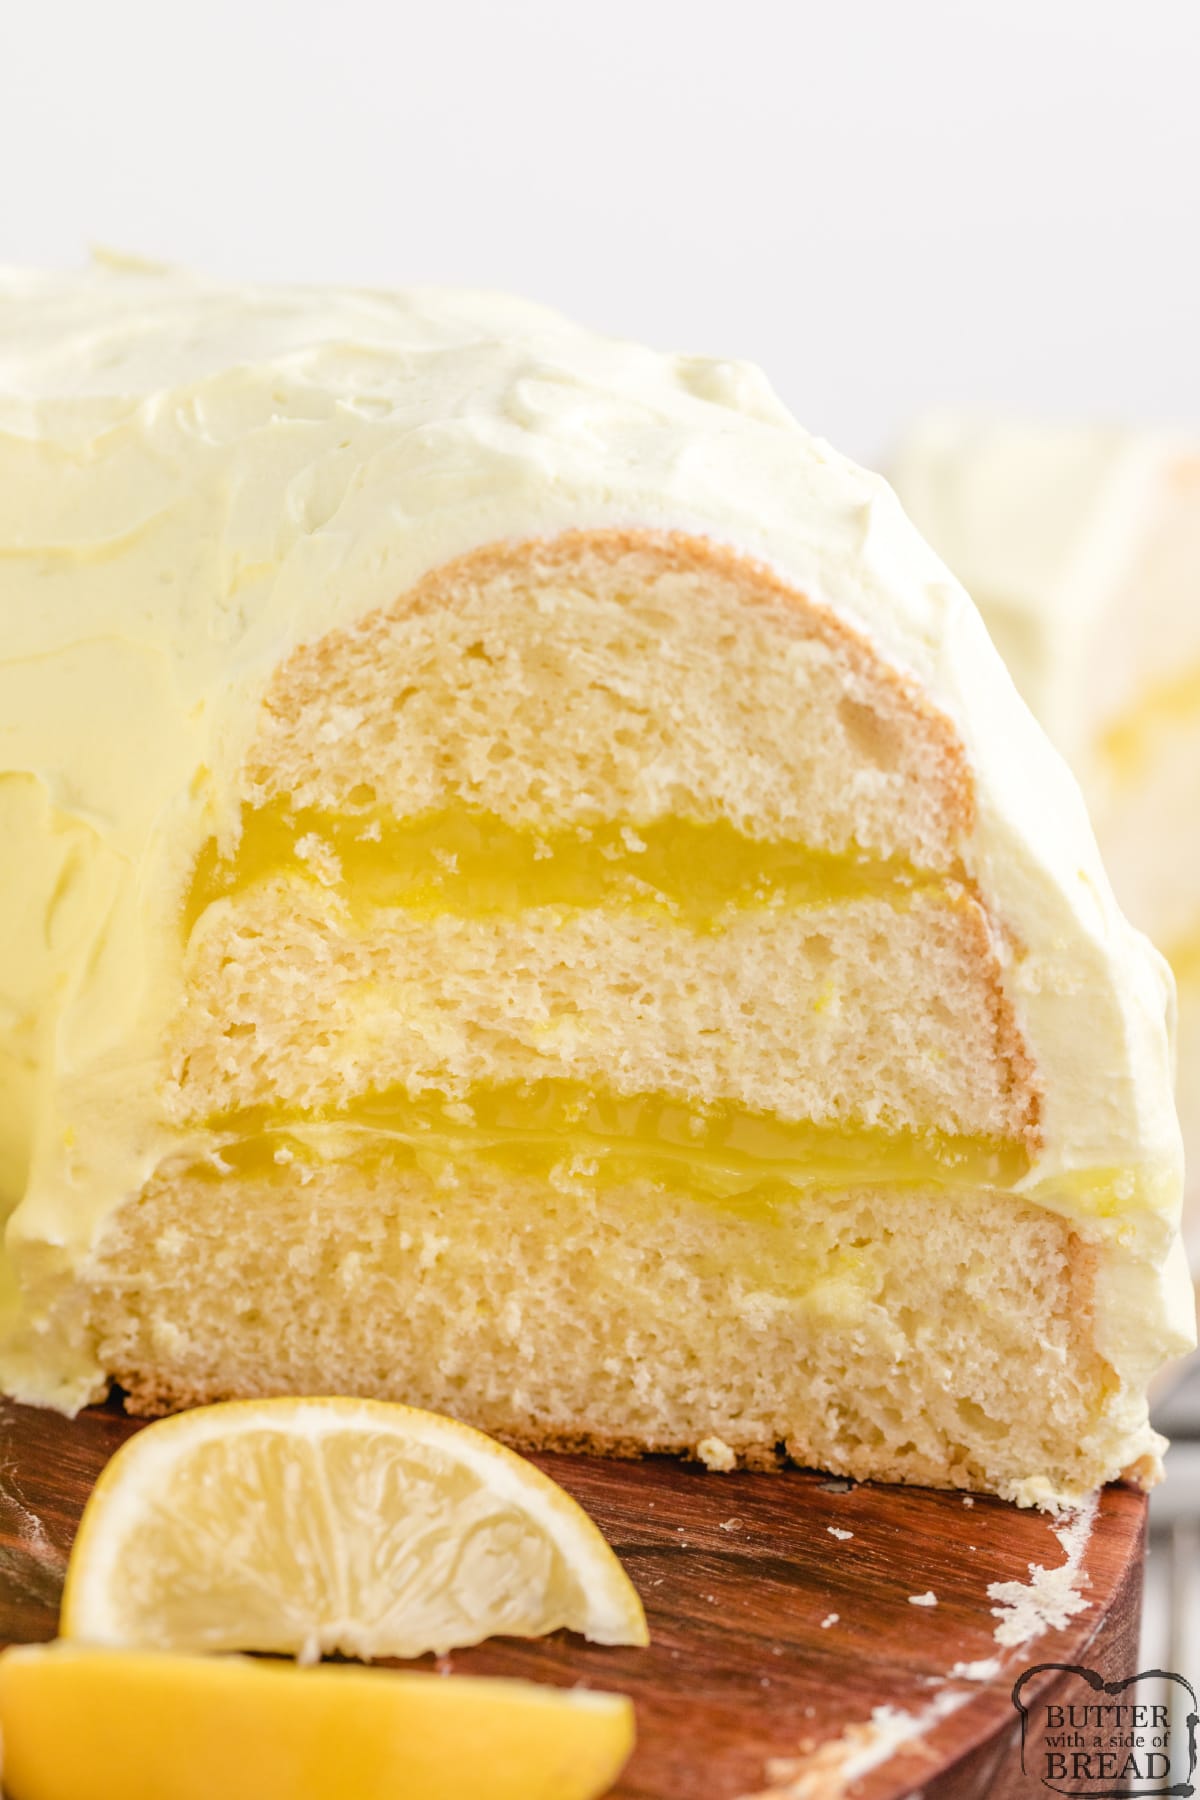 ayered Lemon Chiffon Cake is a light, refreshing dessert. Three layers of cake (made completely from scratch!) with lemon pie filling in between are all topped with a creamy, lemon whipped cream.